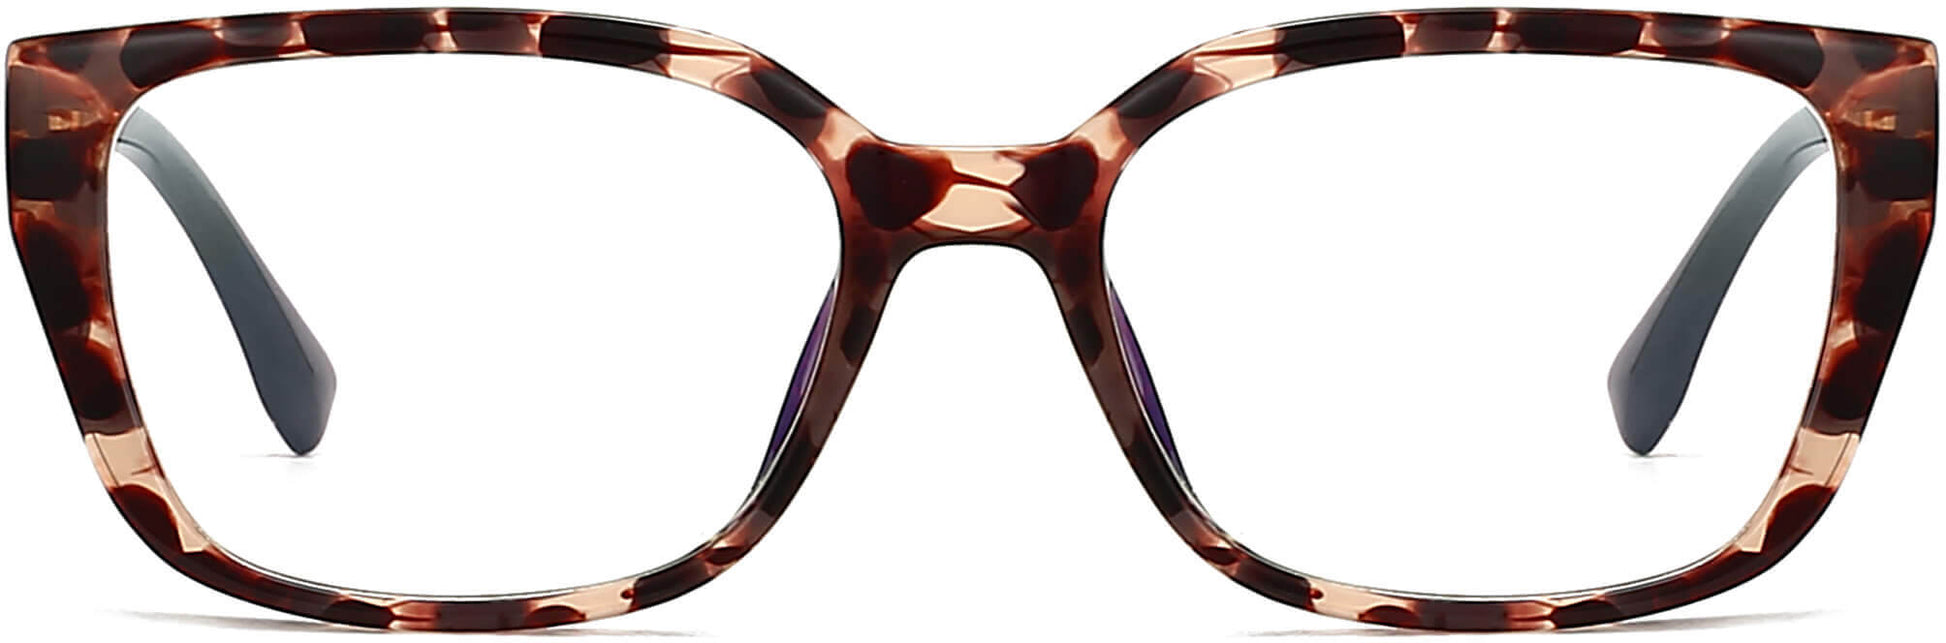 Calico Rectangle Tortoise Eyeglasses  from ANRRI, front view